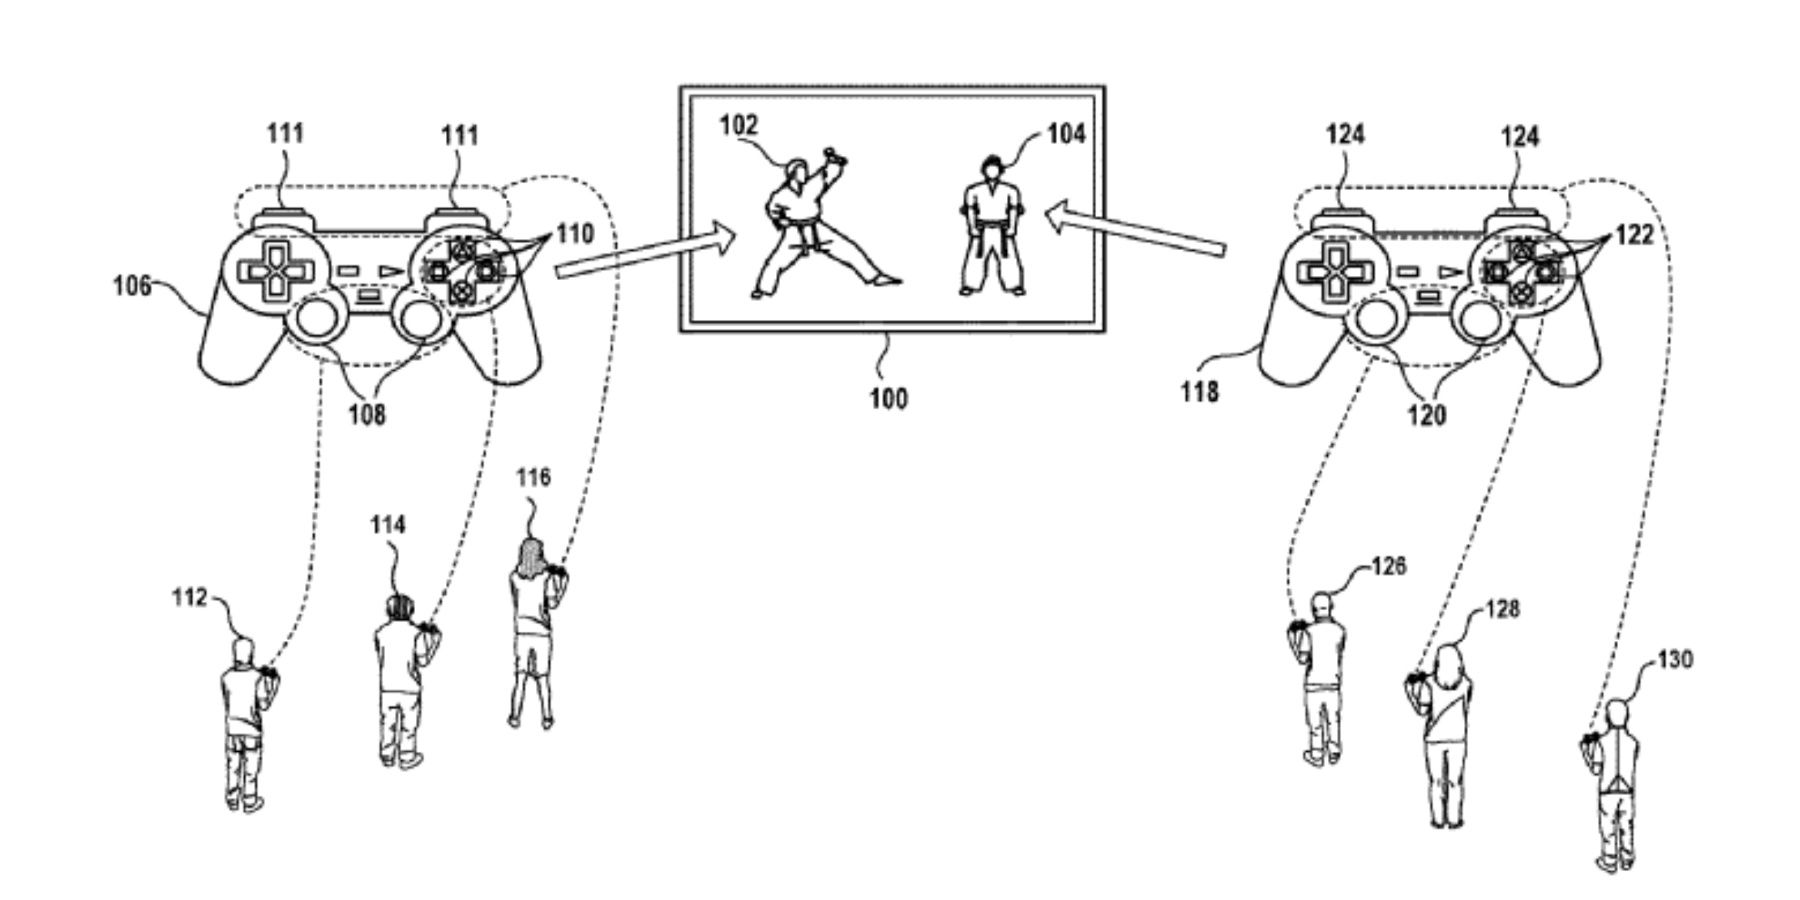 sony shared controller patent illustration and example